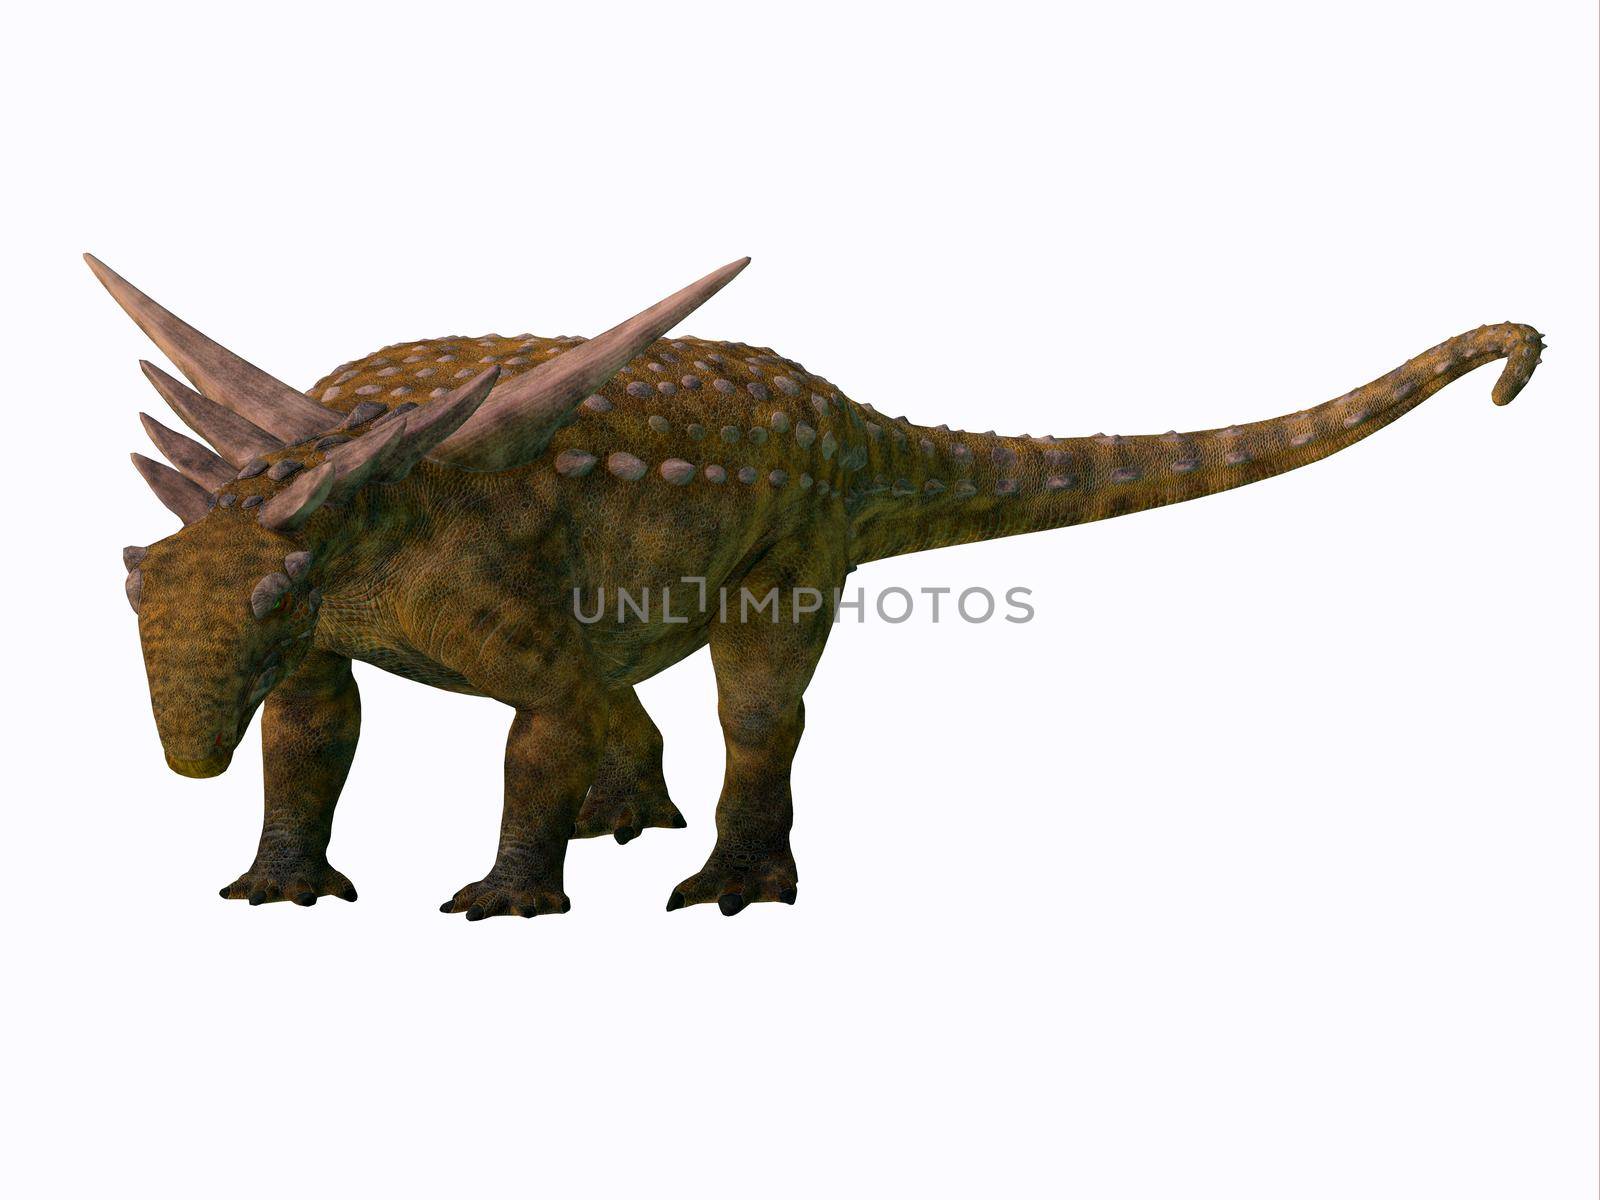 Sauropelta was an armored herbivore nodosaur dinosaur that lived in North America during the Cretaceous Period.